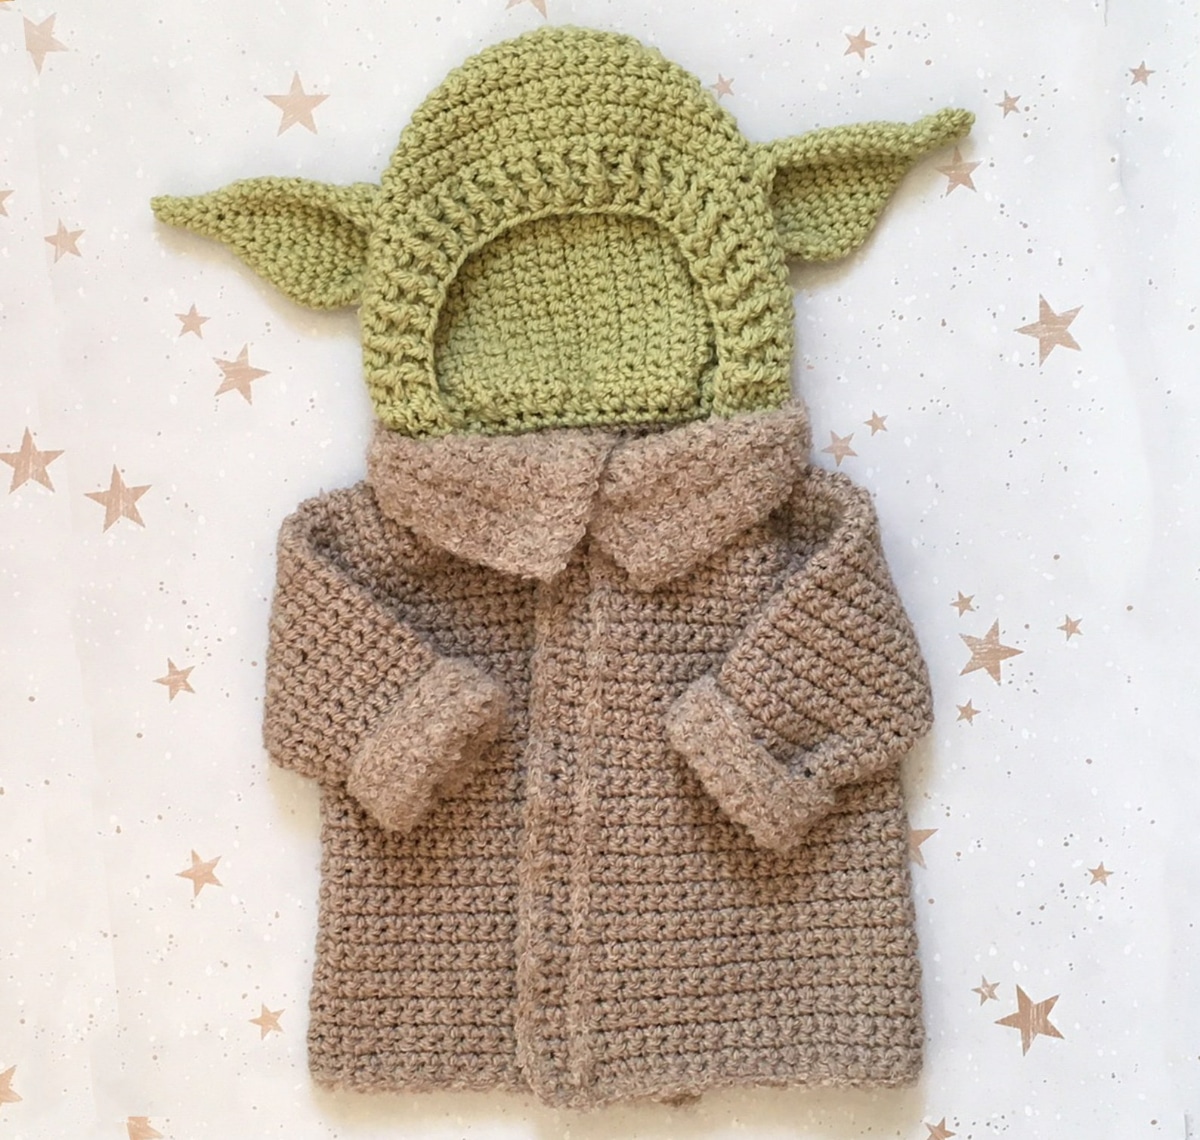 Crochet baby Yoda costume with a green crochet hat with ears either side and long brown robe with a small collar.